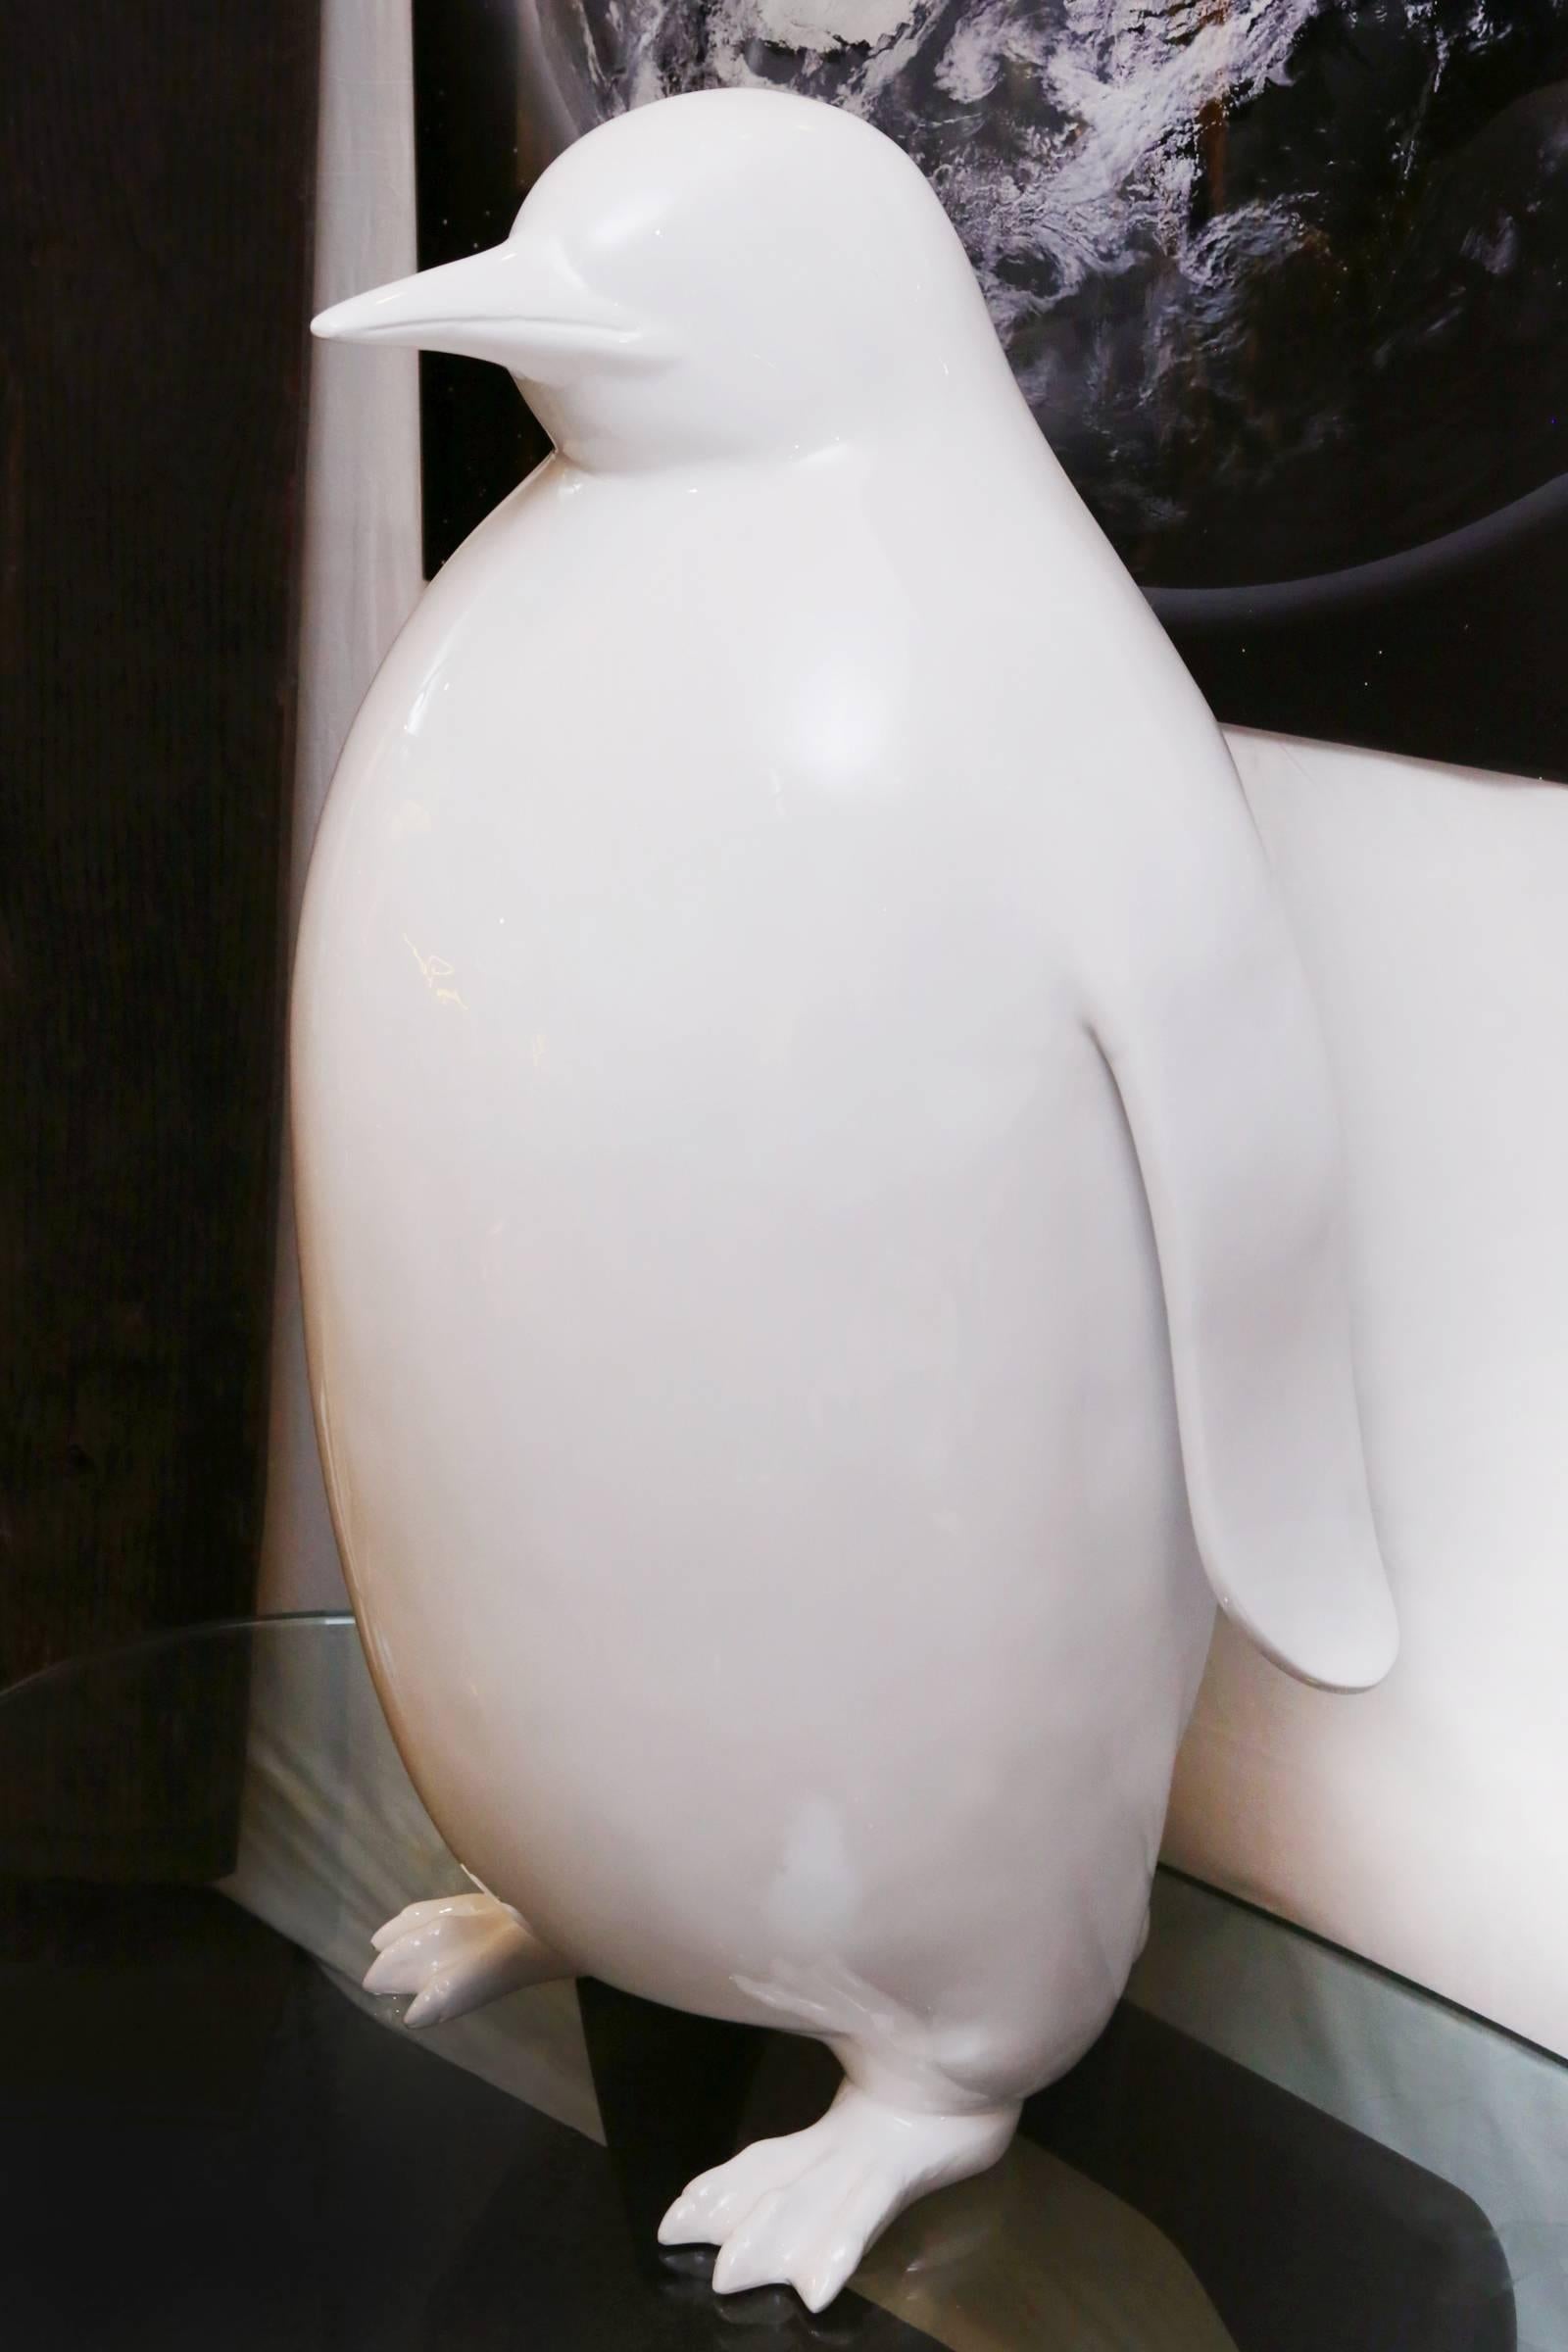 Sculpture of Emperor penguin in varnished white
lacquered resin.
Created by David Rousselot – Paris
Two sizes available.
Measures: 
Small model, L 50 x D 40 x H 85cm. Price: €4250.00
Small model available now.
Large model, L 70 x D 50 x